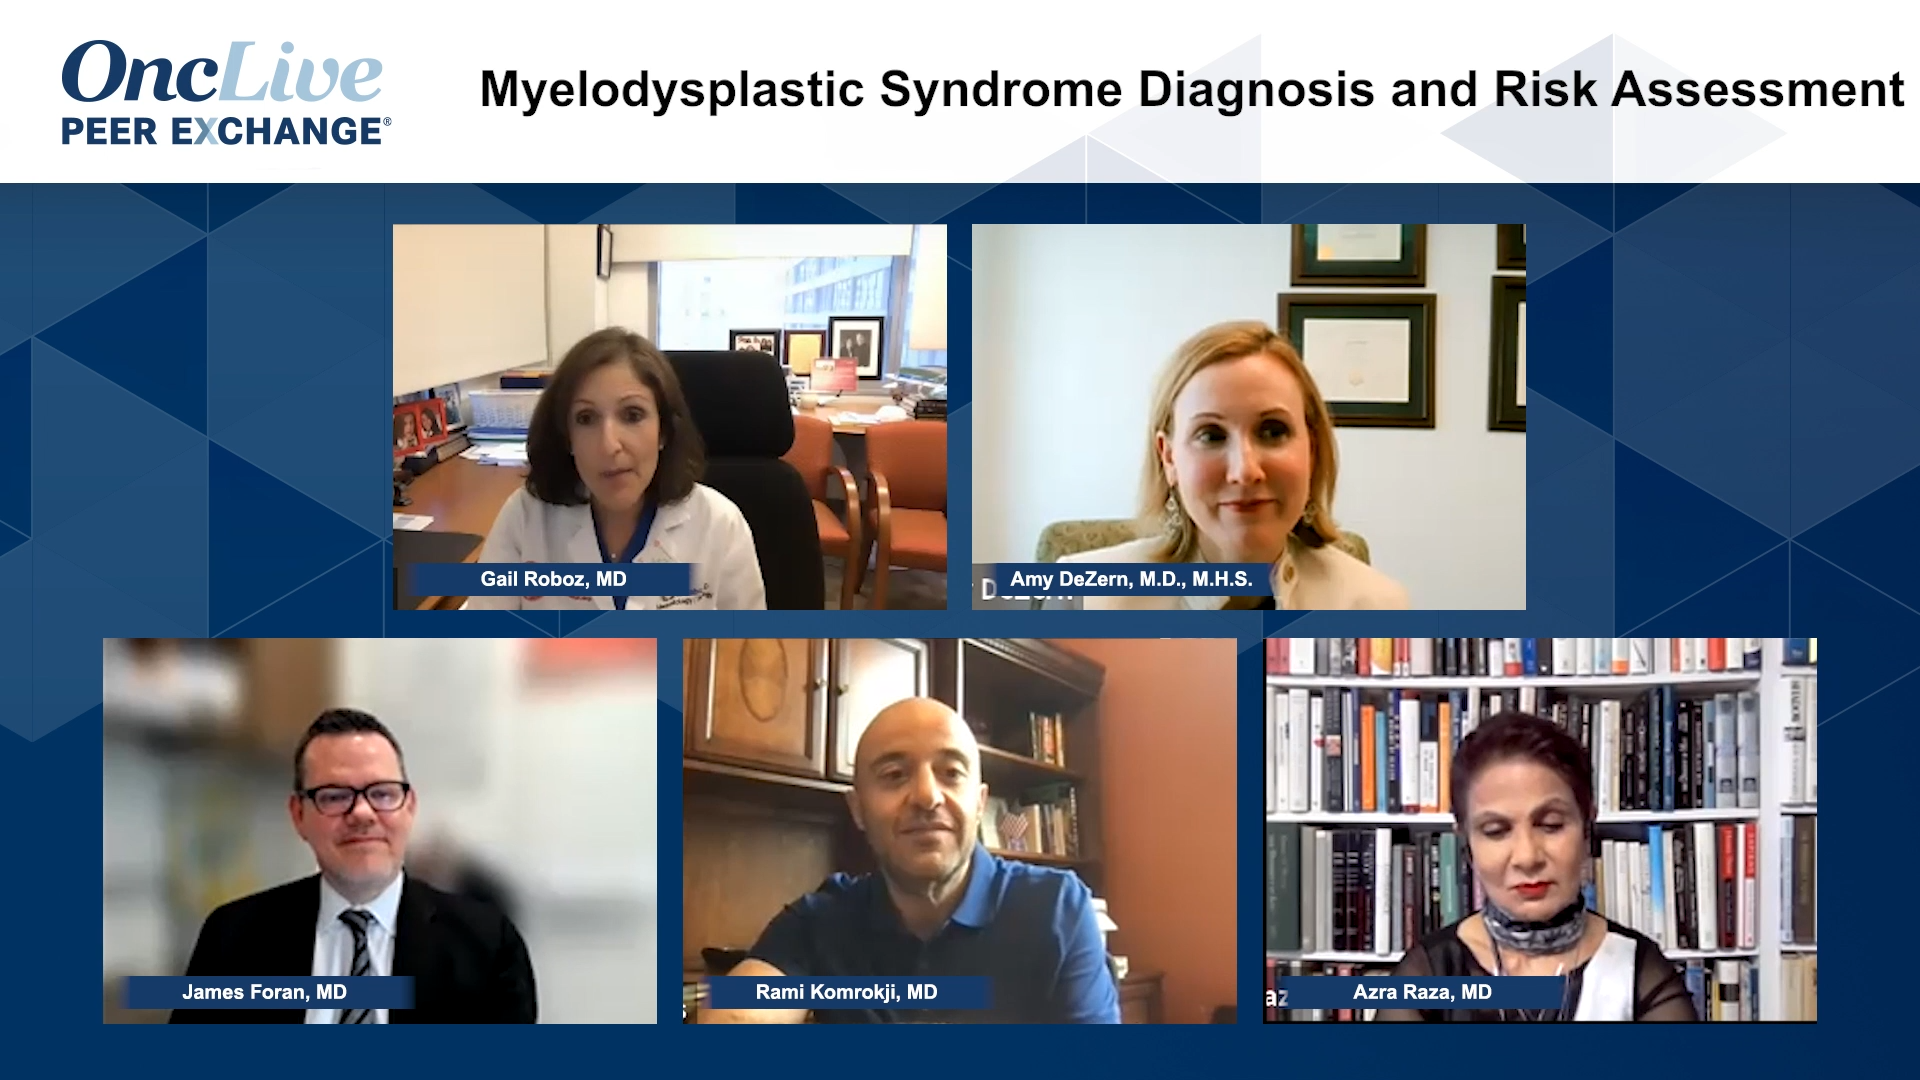 Myelodysplastic Syndrome Diagnosis and Risk Assessment